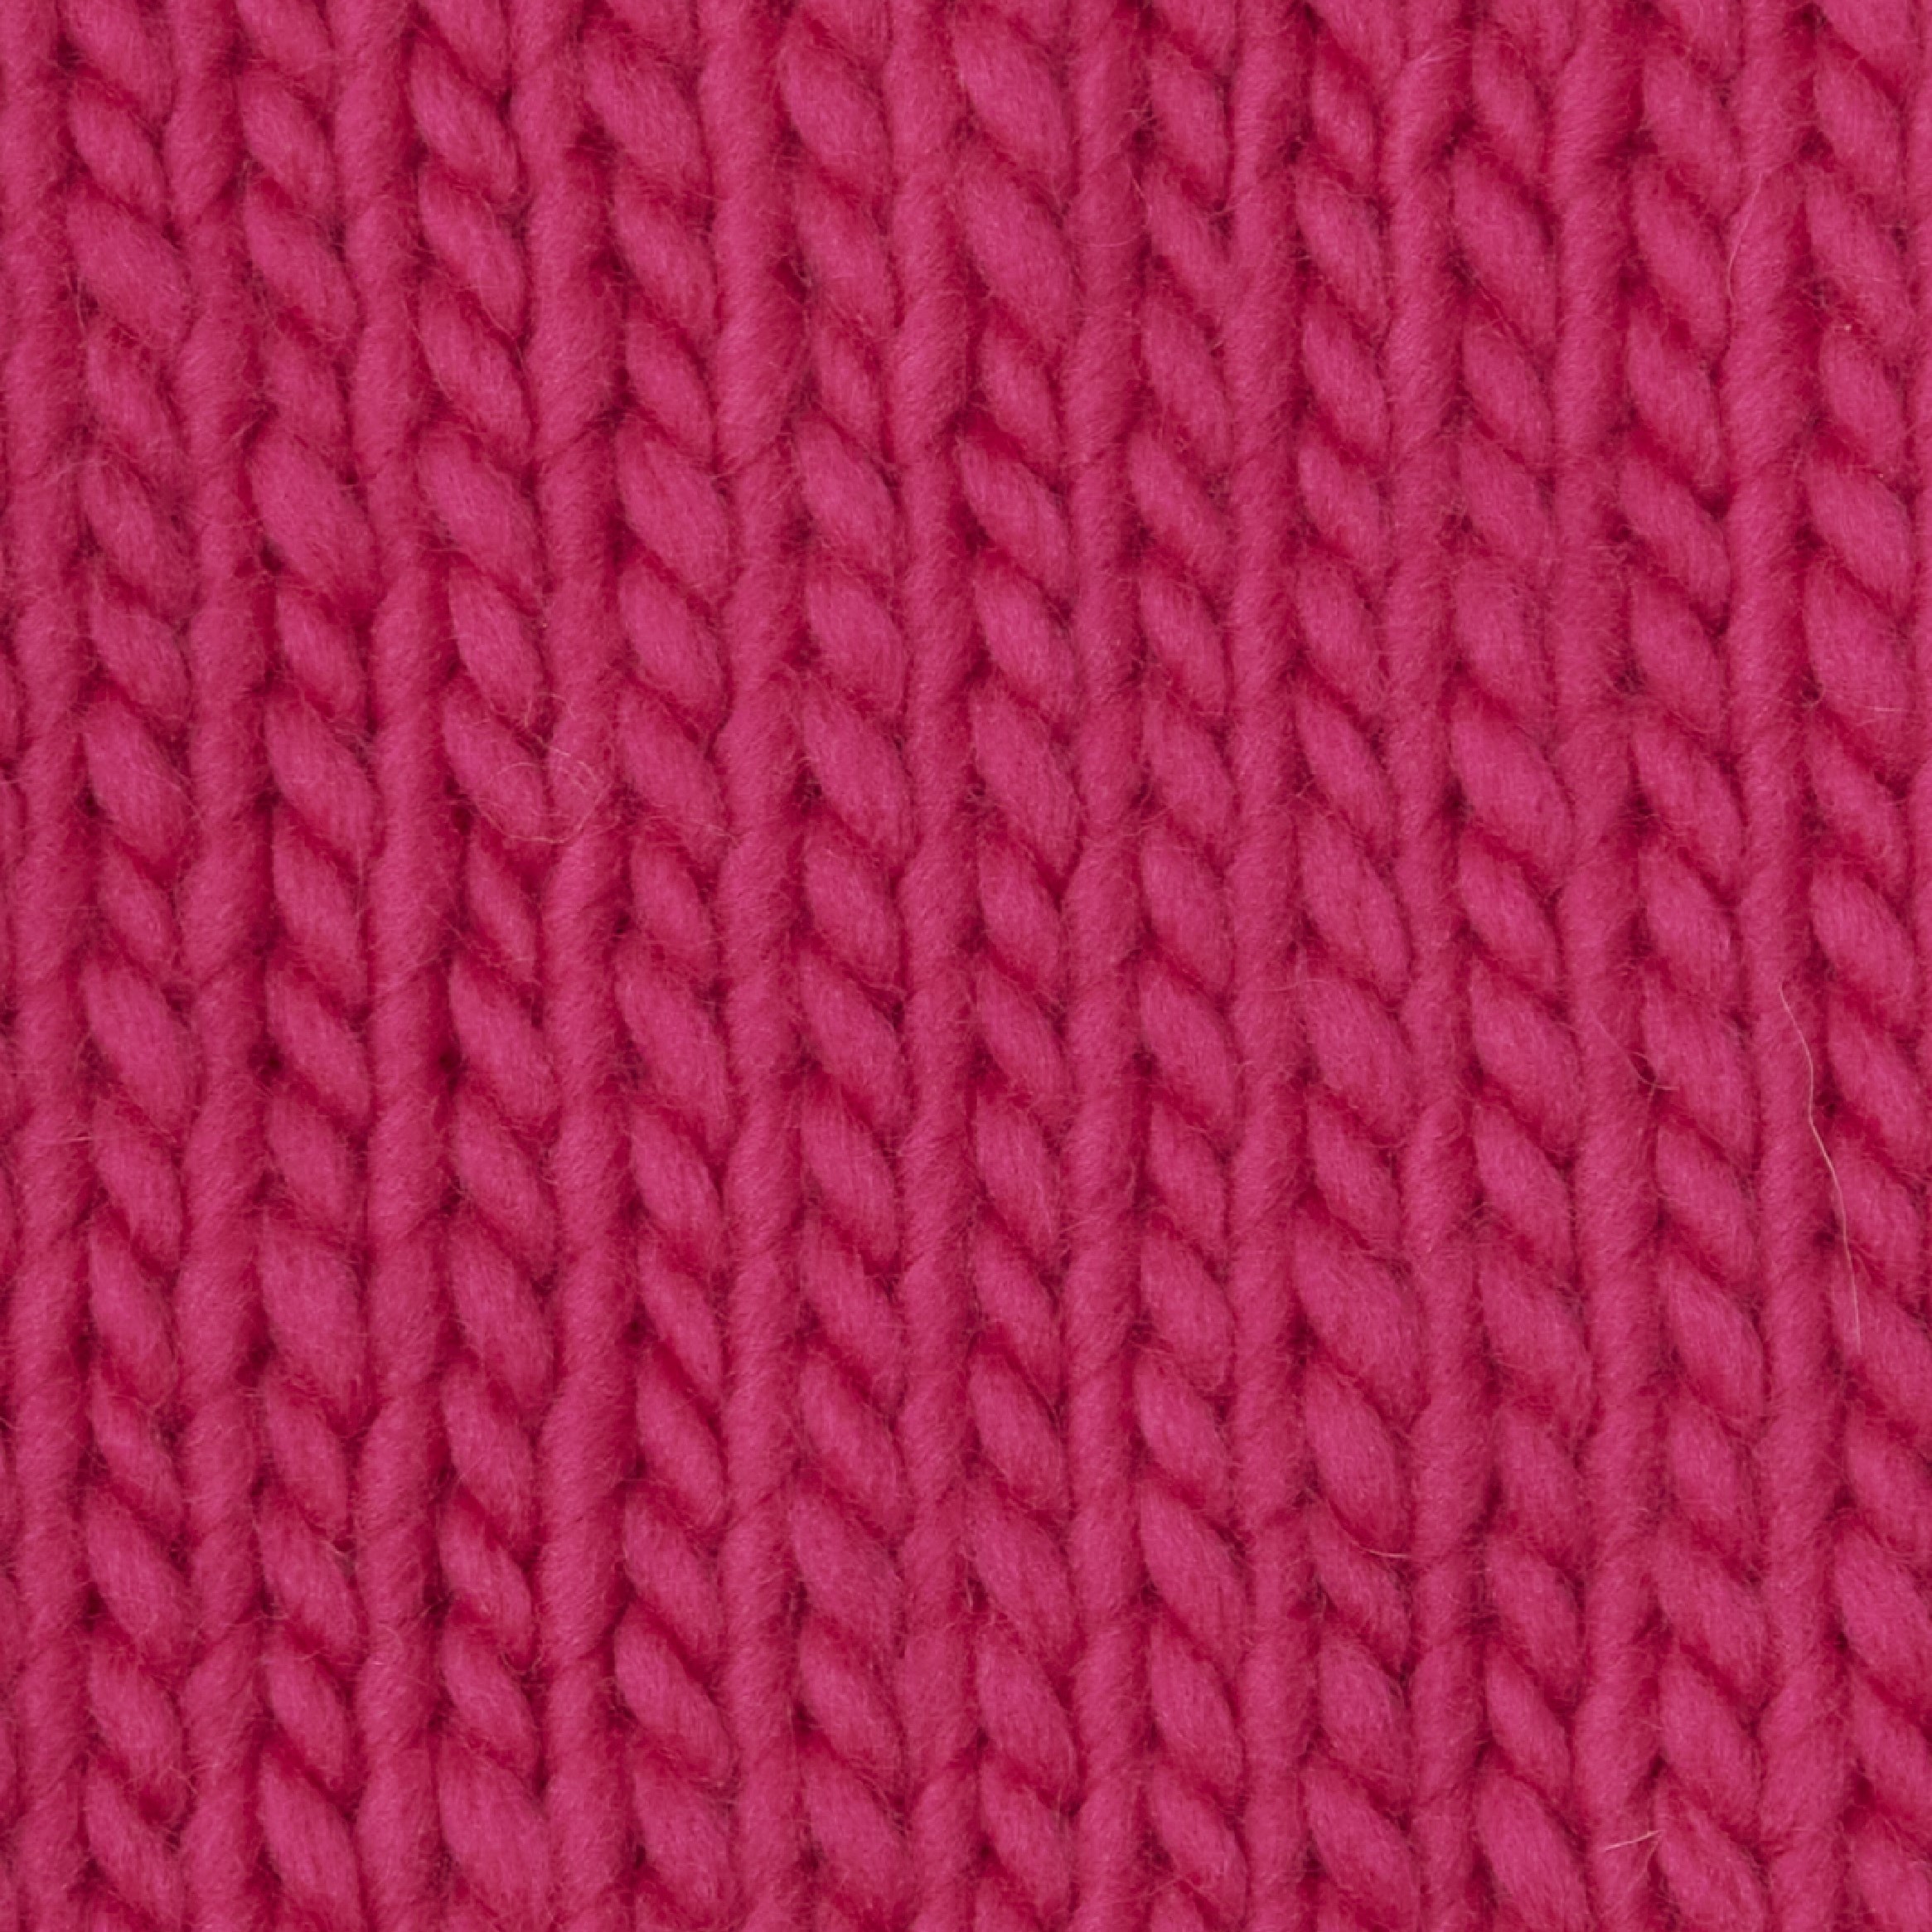 Wool and the Gang Hot Punk Pink Lil’ Crazy Sexy Wool 100g